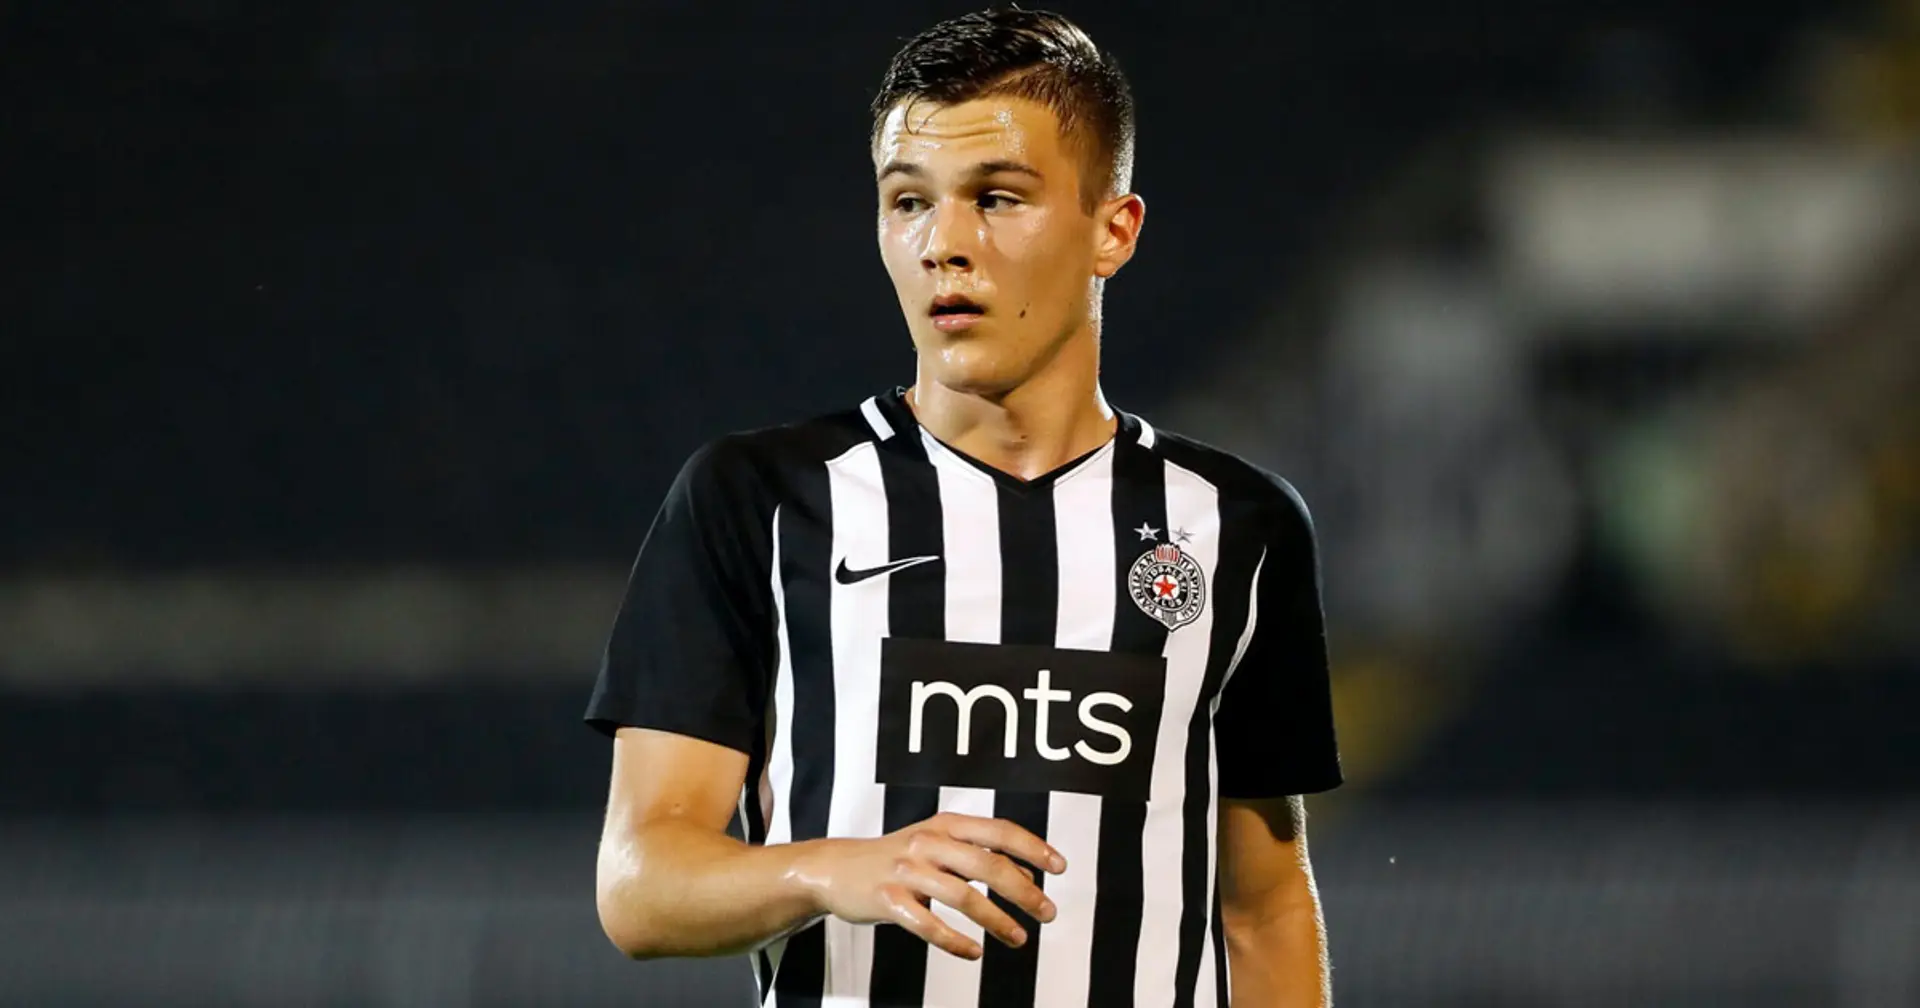 FK Partizan youngster Filip Stevanovic set to join Man City – months after being linked to United